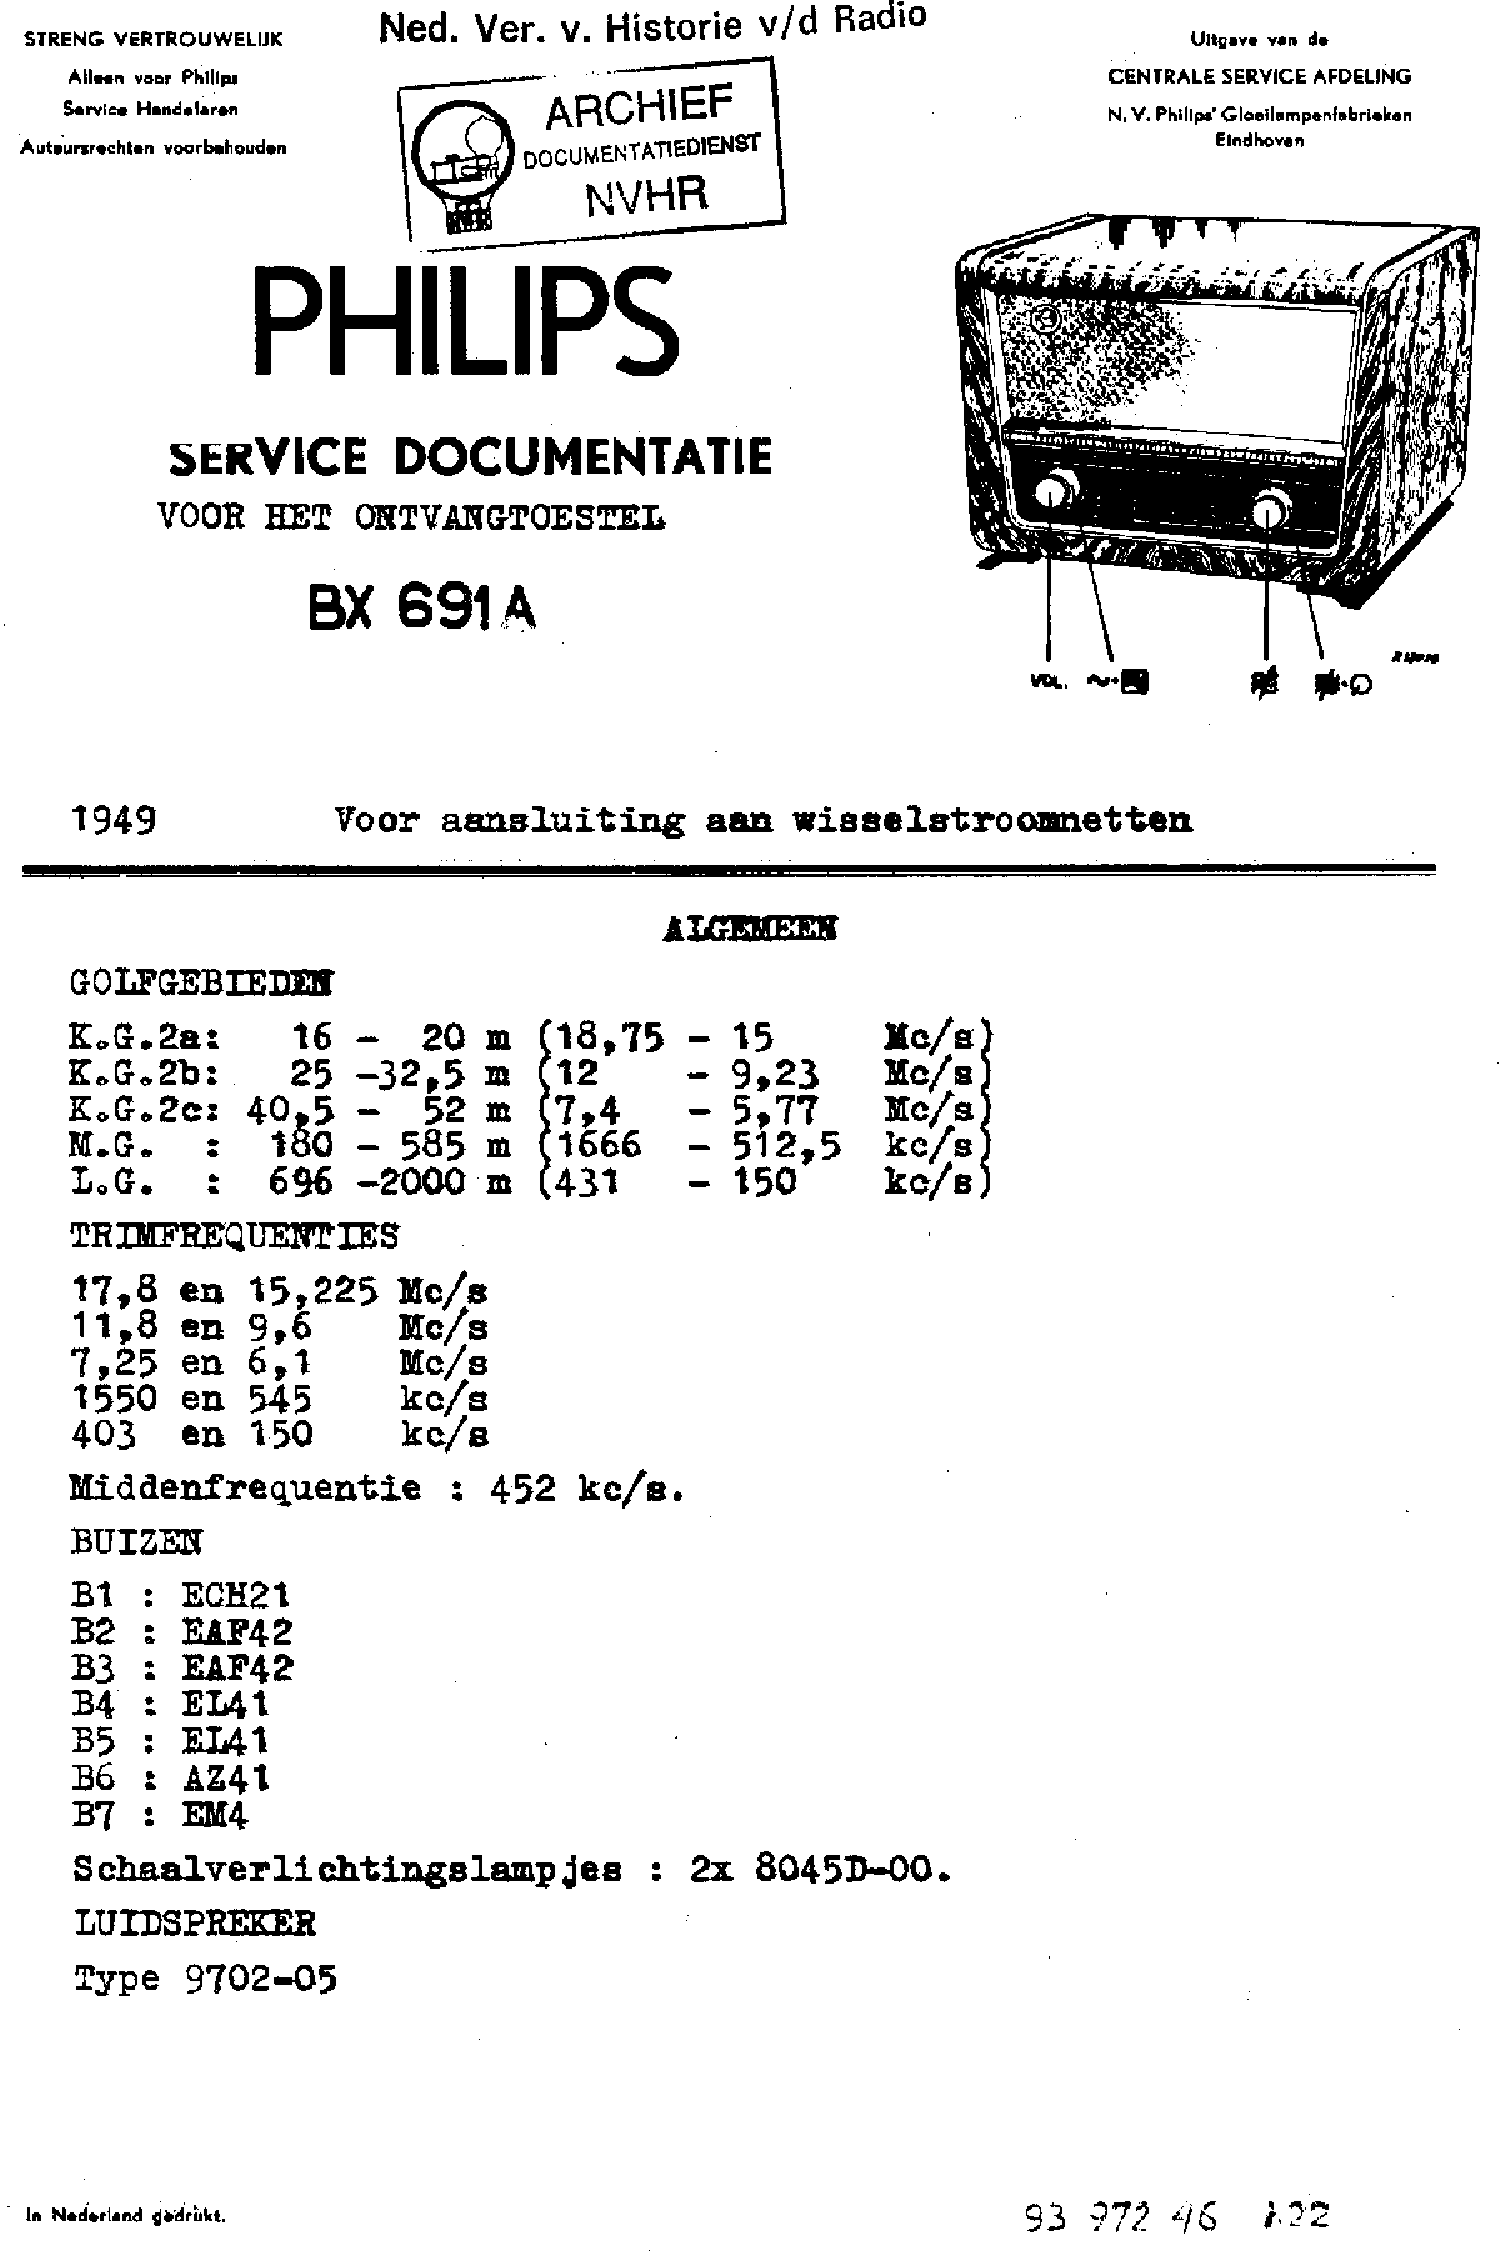 PHILIPS BX691A AC RECEIVER 1949 SM service manual (1st page)